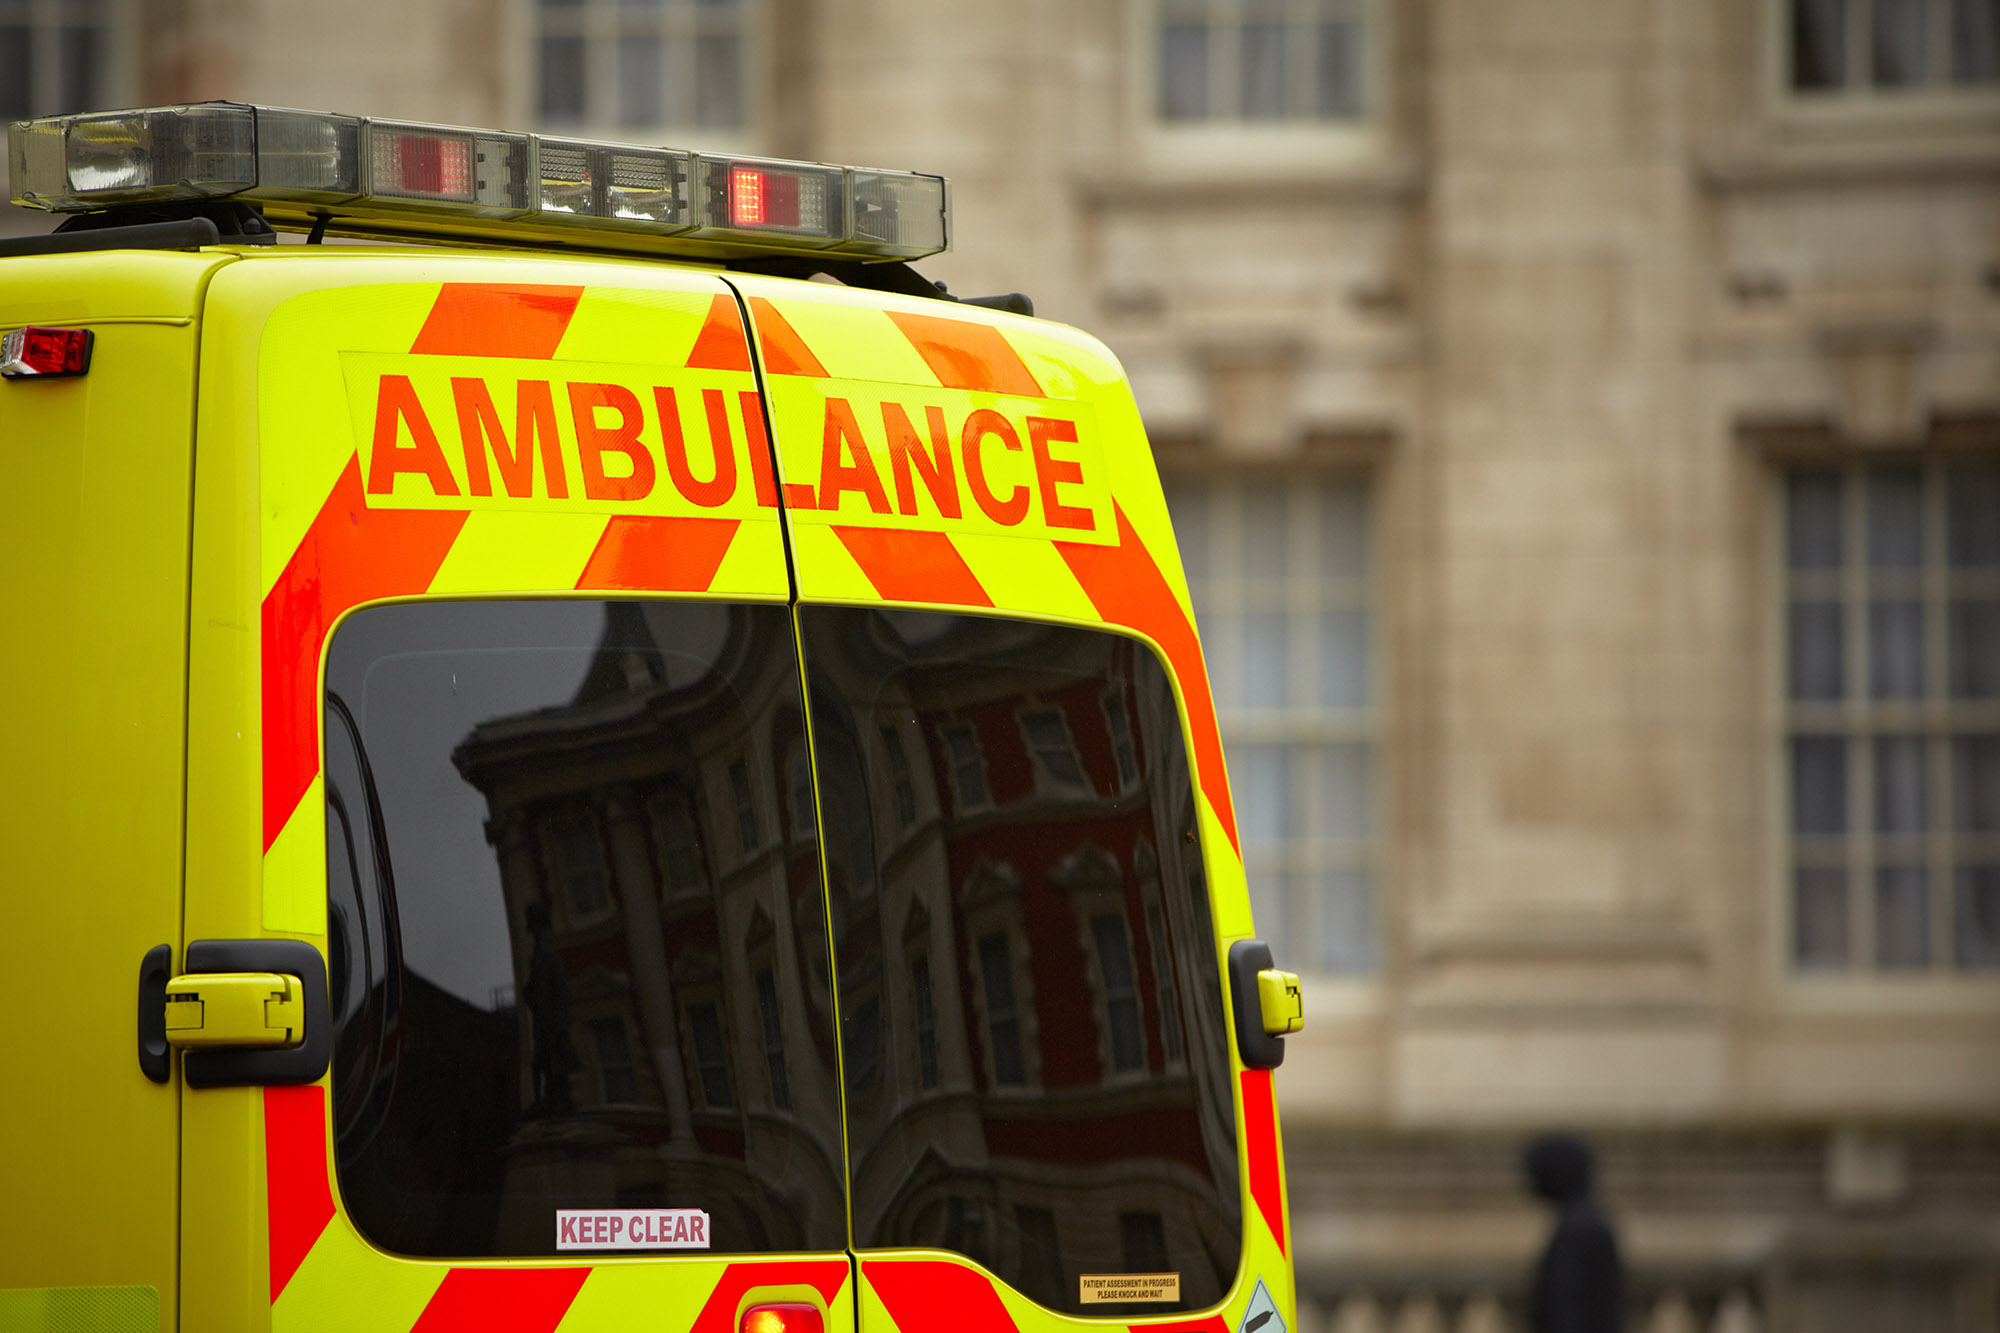 Ambulance, personal injury solicitors, accident claim solicitors Aberdeen